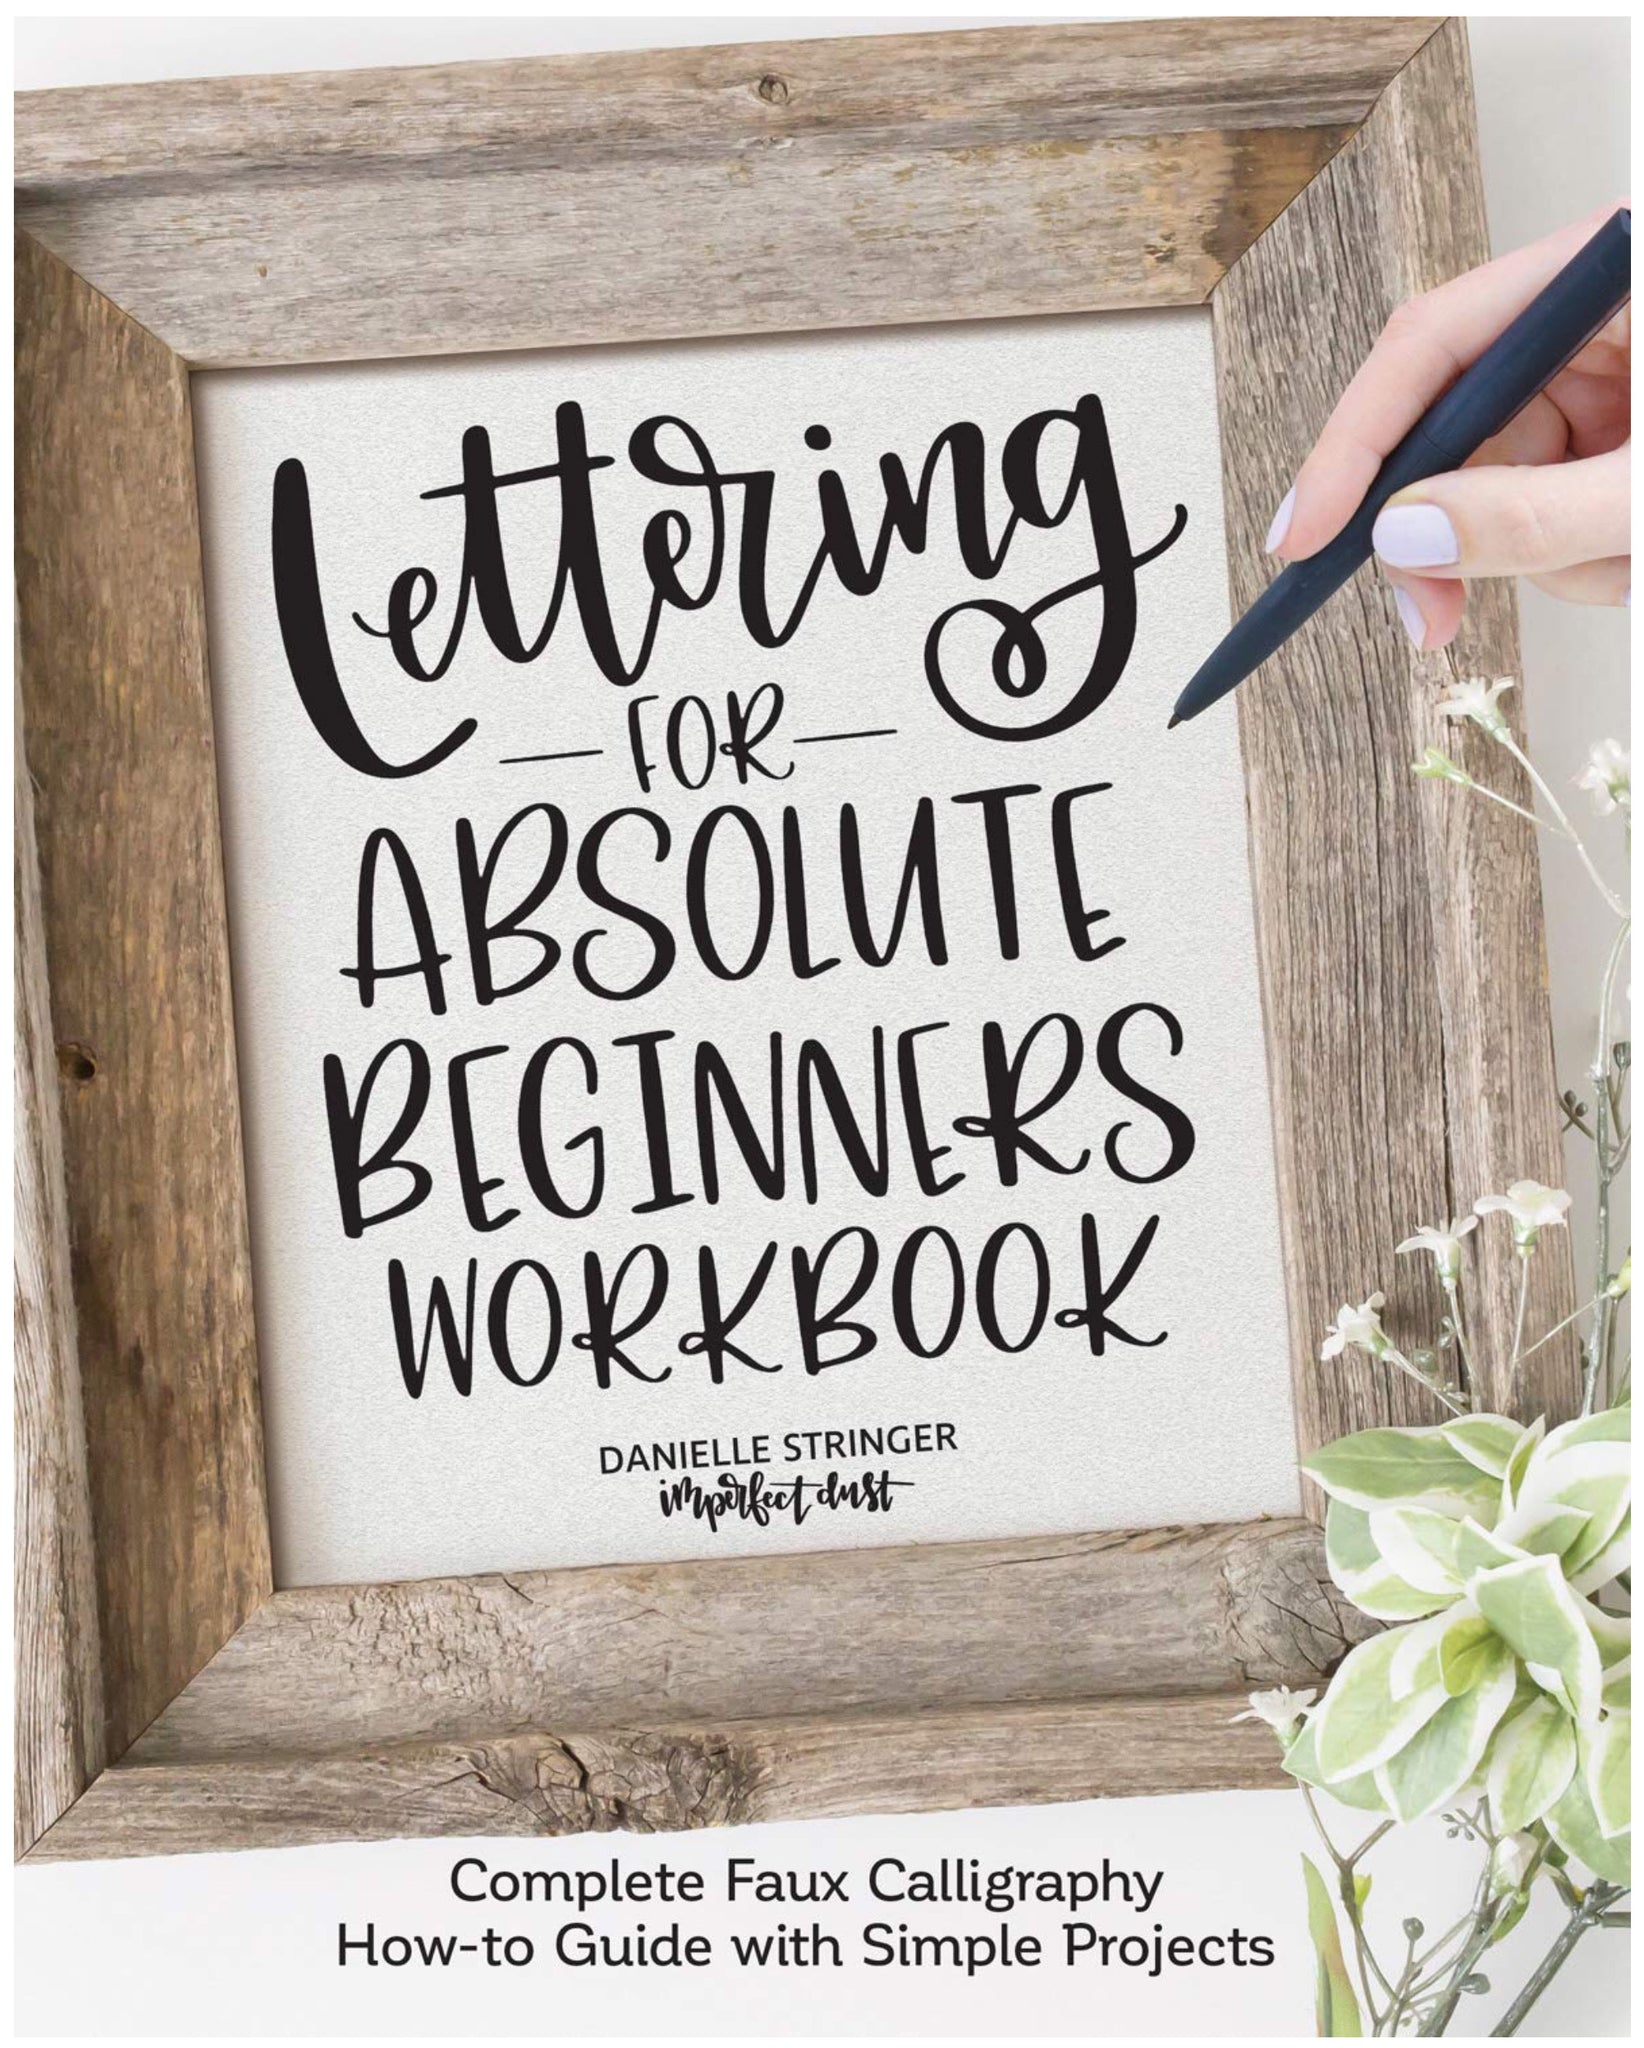 Lettering For Absolute Beginners Workbook – Imperfect Dust